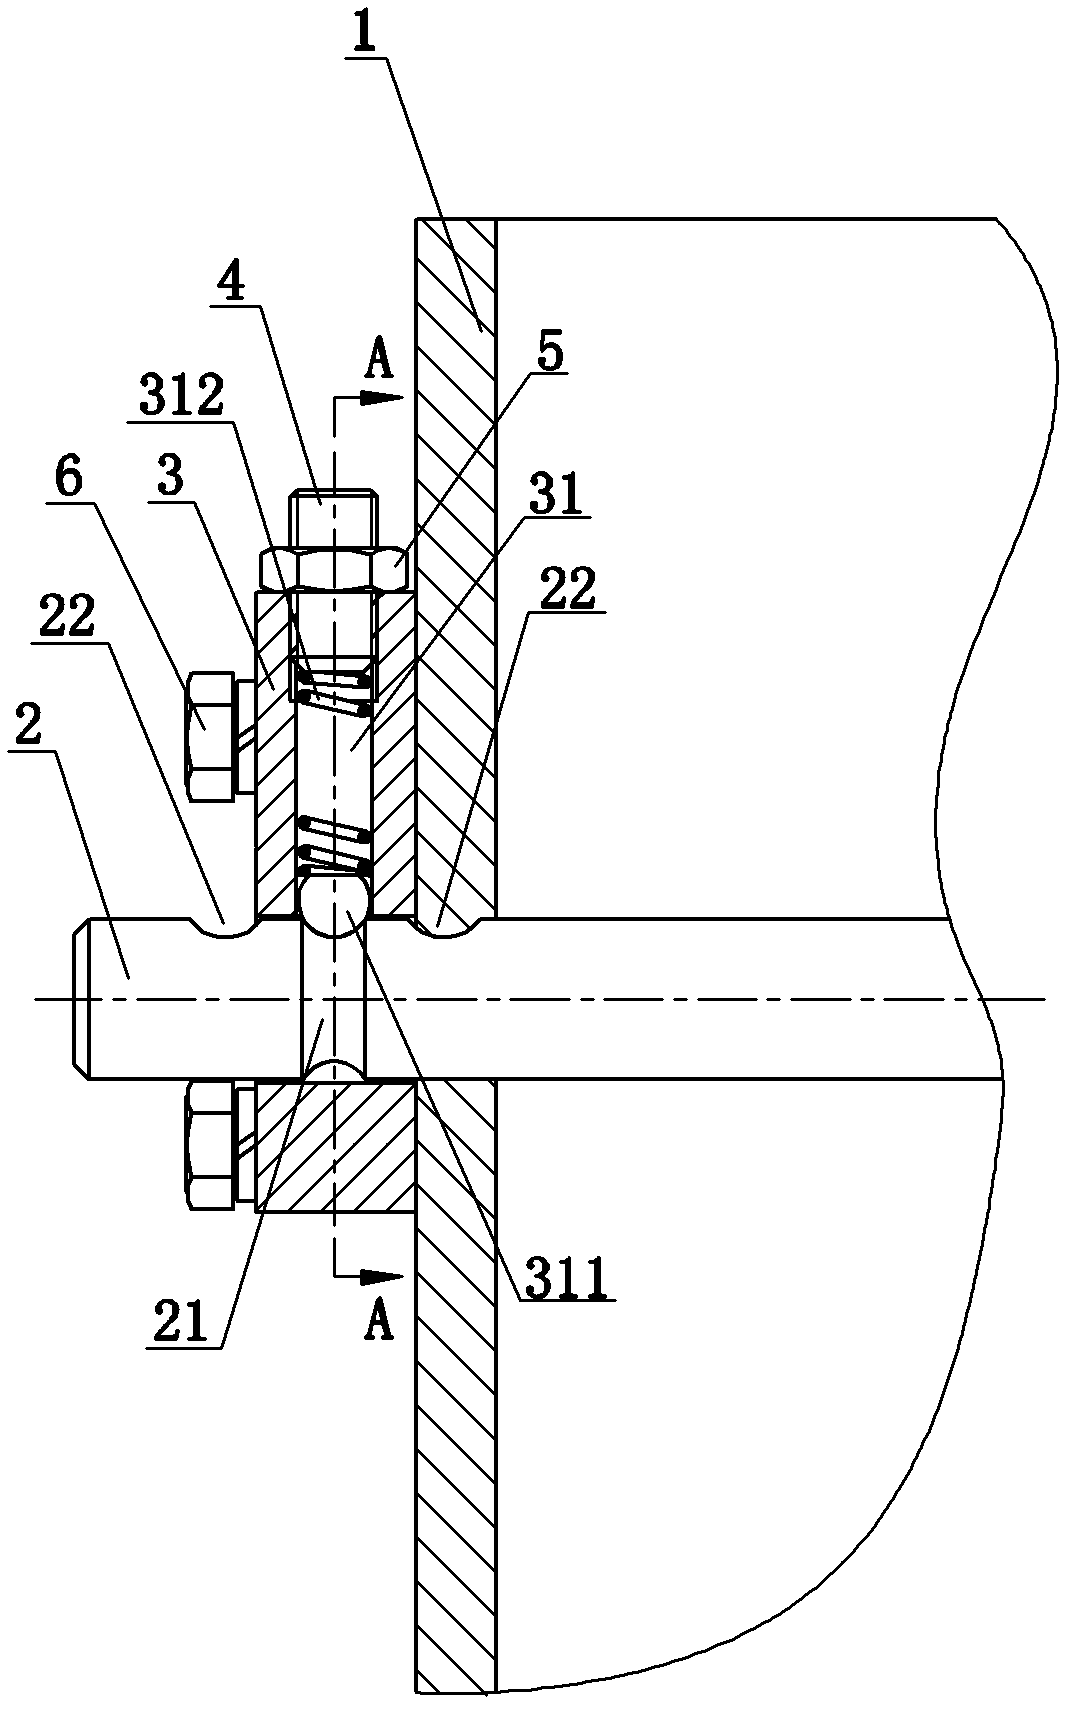 Self-locking and interlocking mechanism for shifting fork shafts of gearbox